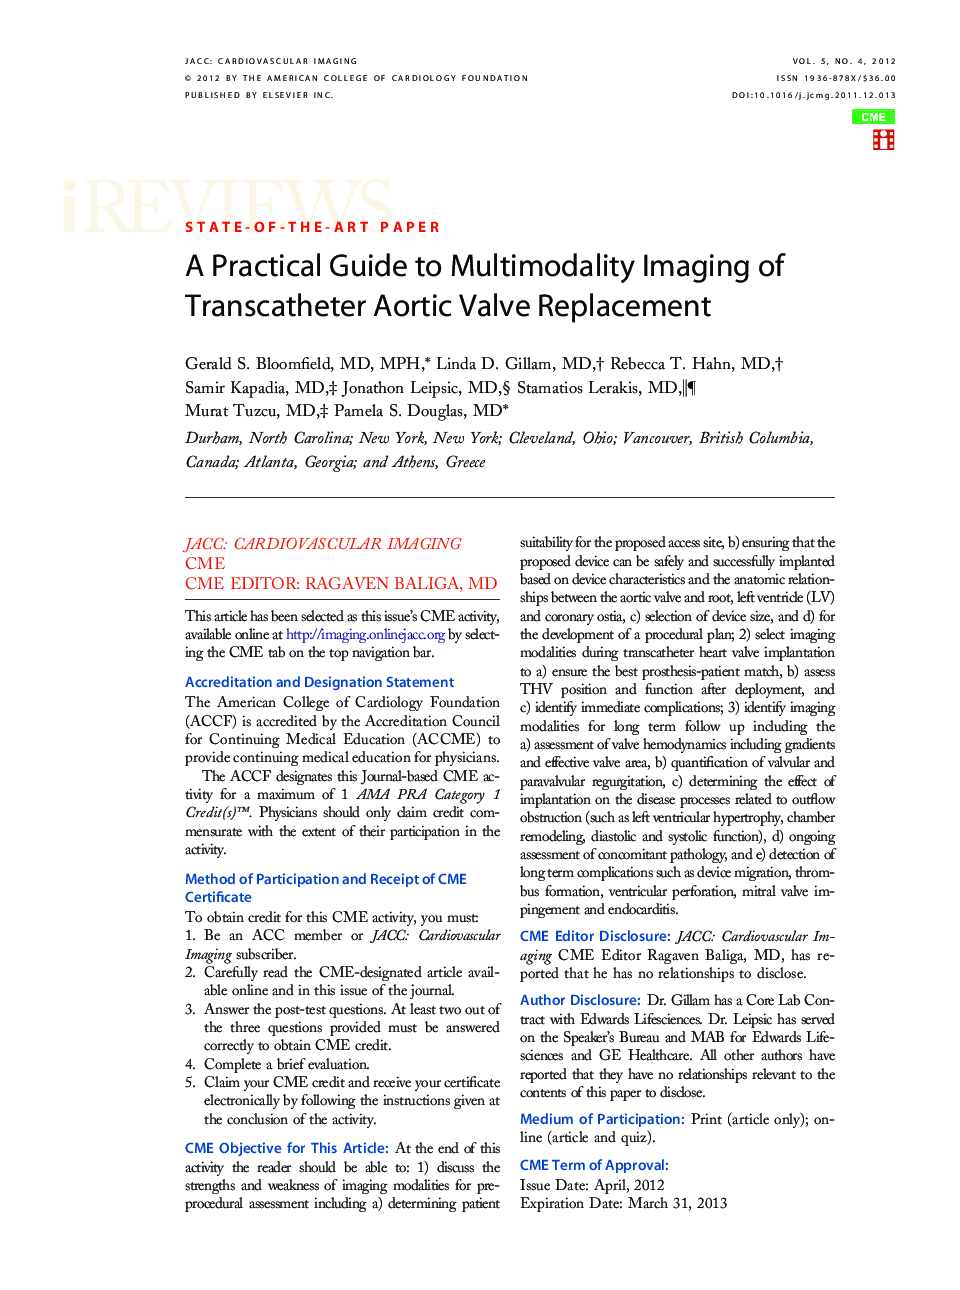 A Practical Guide to Multimodality Imaging of Transcatheter Aortic Valve Replacement 